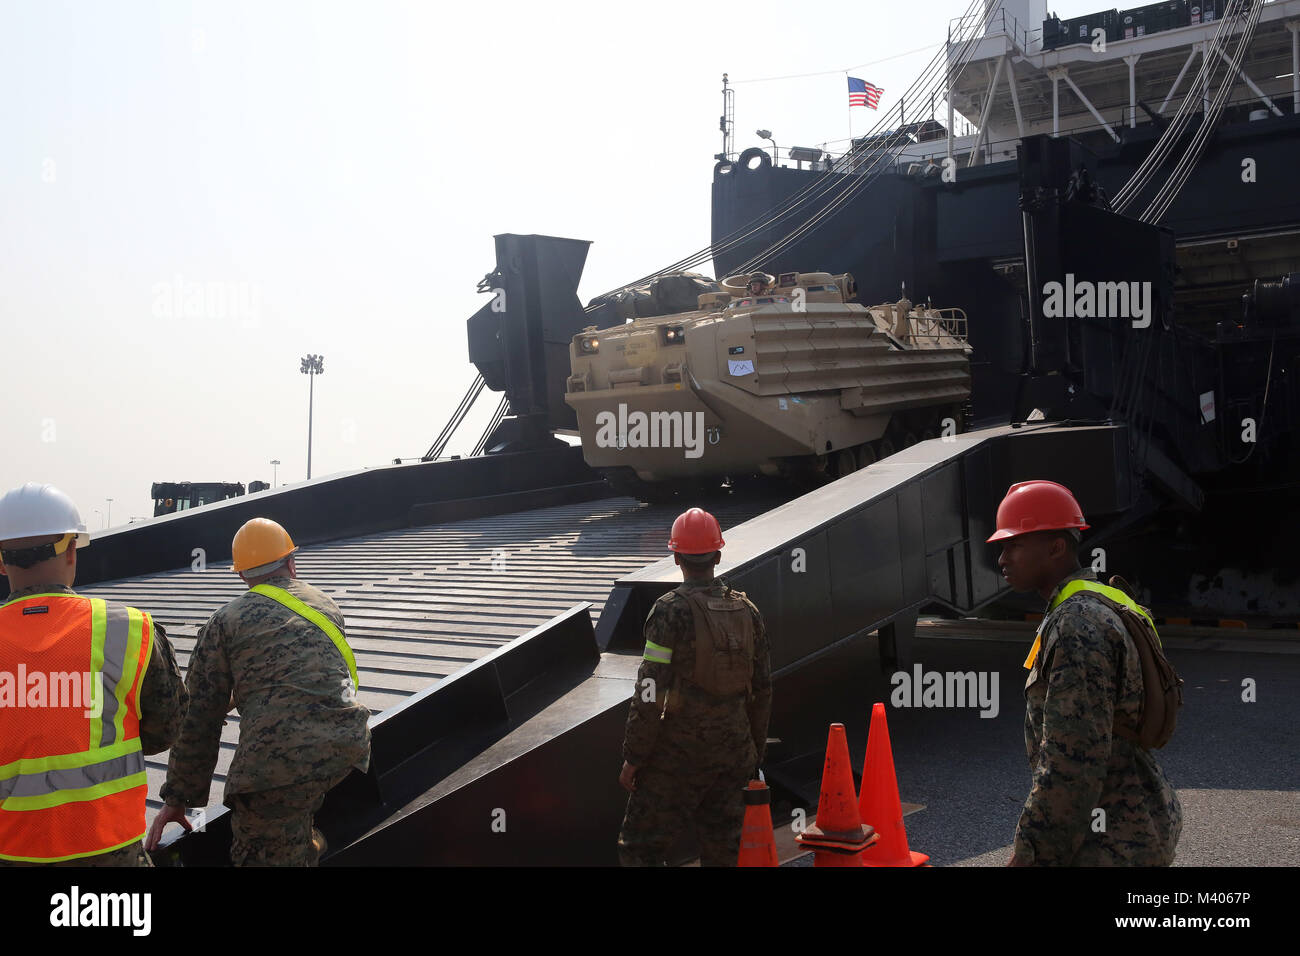 180206-N-IX266-008 LAEM CHABANG, Thailand— An amphibious assault vehicle rolls off the ramp of Military Sealift Command’s (MSC) large, medium-speed, roll-on/roll-off ship USNS Pililaau (T-AK 304) as Marines of the Offload Preparation Party observe during an offload at the port here in support of Cobra Gold 2018, Feb. 5. The USNS Pililaau is part of Maritime Prepositioning Ships Squadron THREE, which consists of a fleet of government-owned ships operated by MSC and is based in the Guam-Saipan area of the Western Pacific Ocean. CG18 is a Thailand and United States co-sponsored exercise conducted Stock Photo